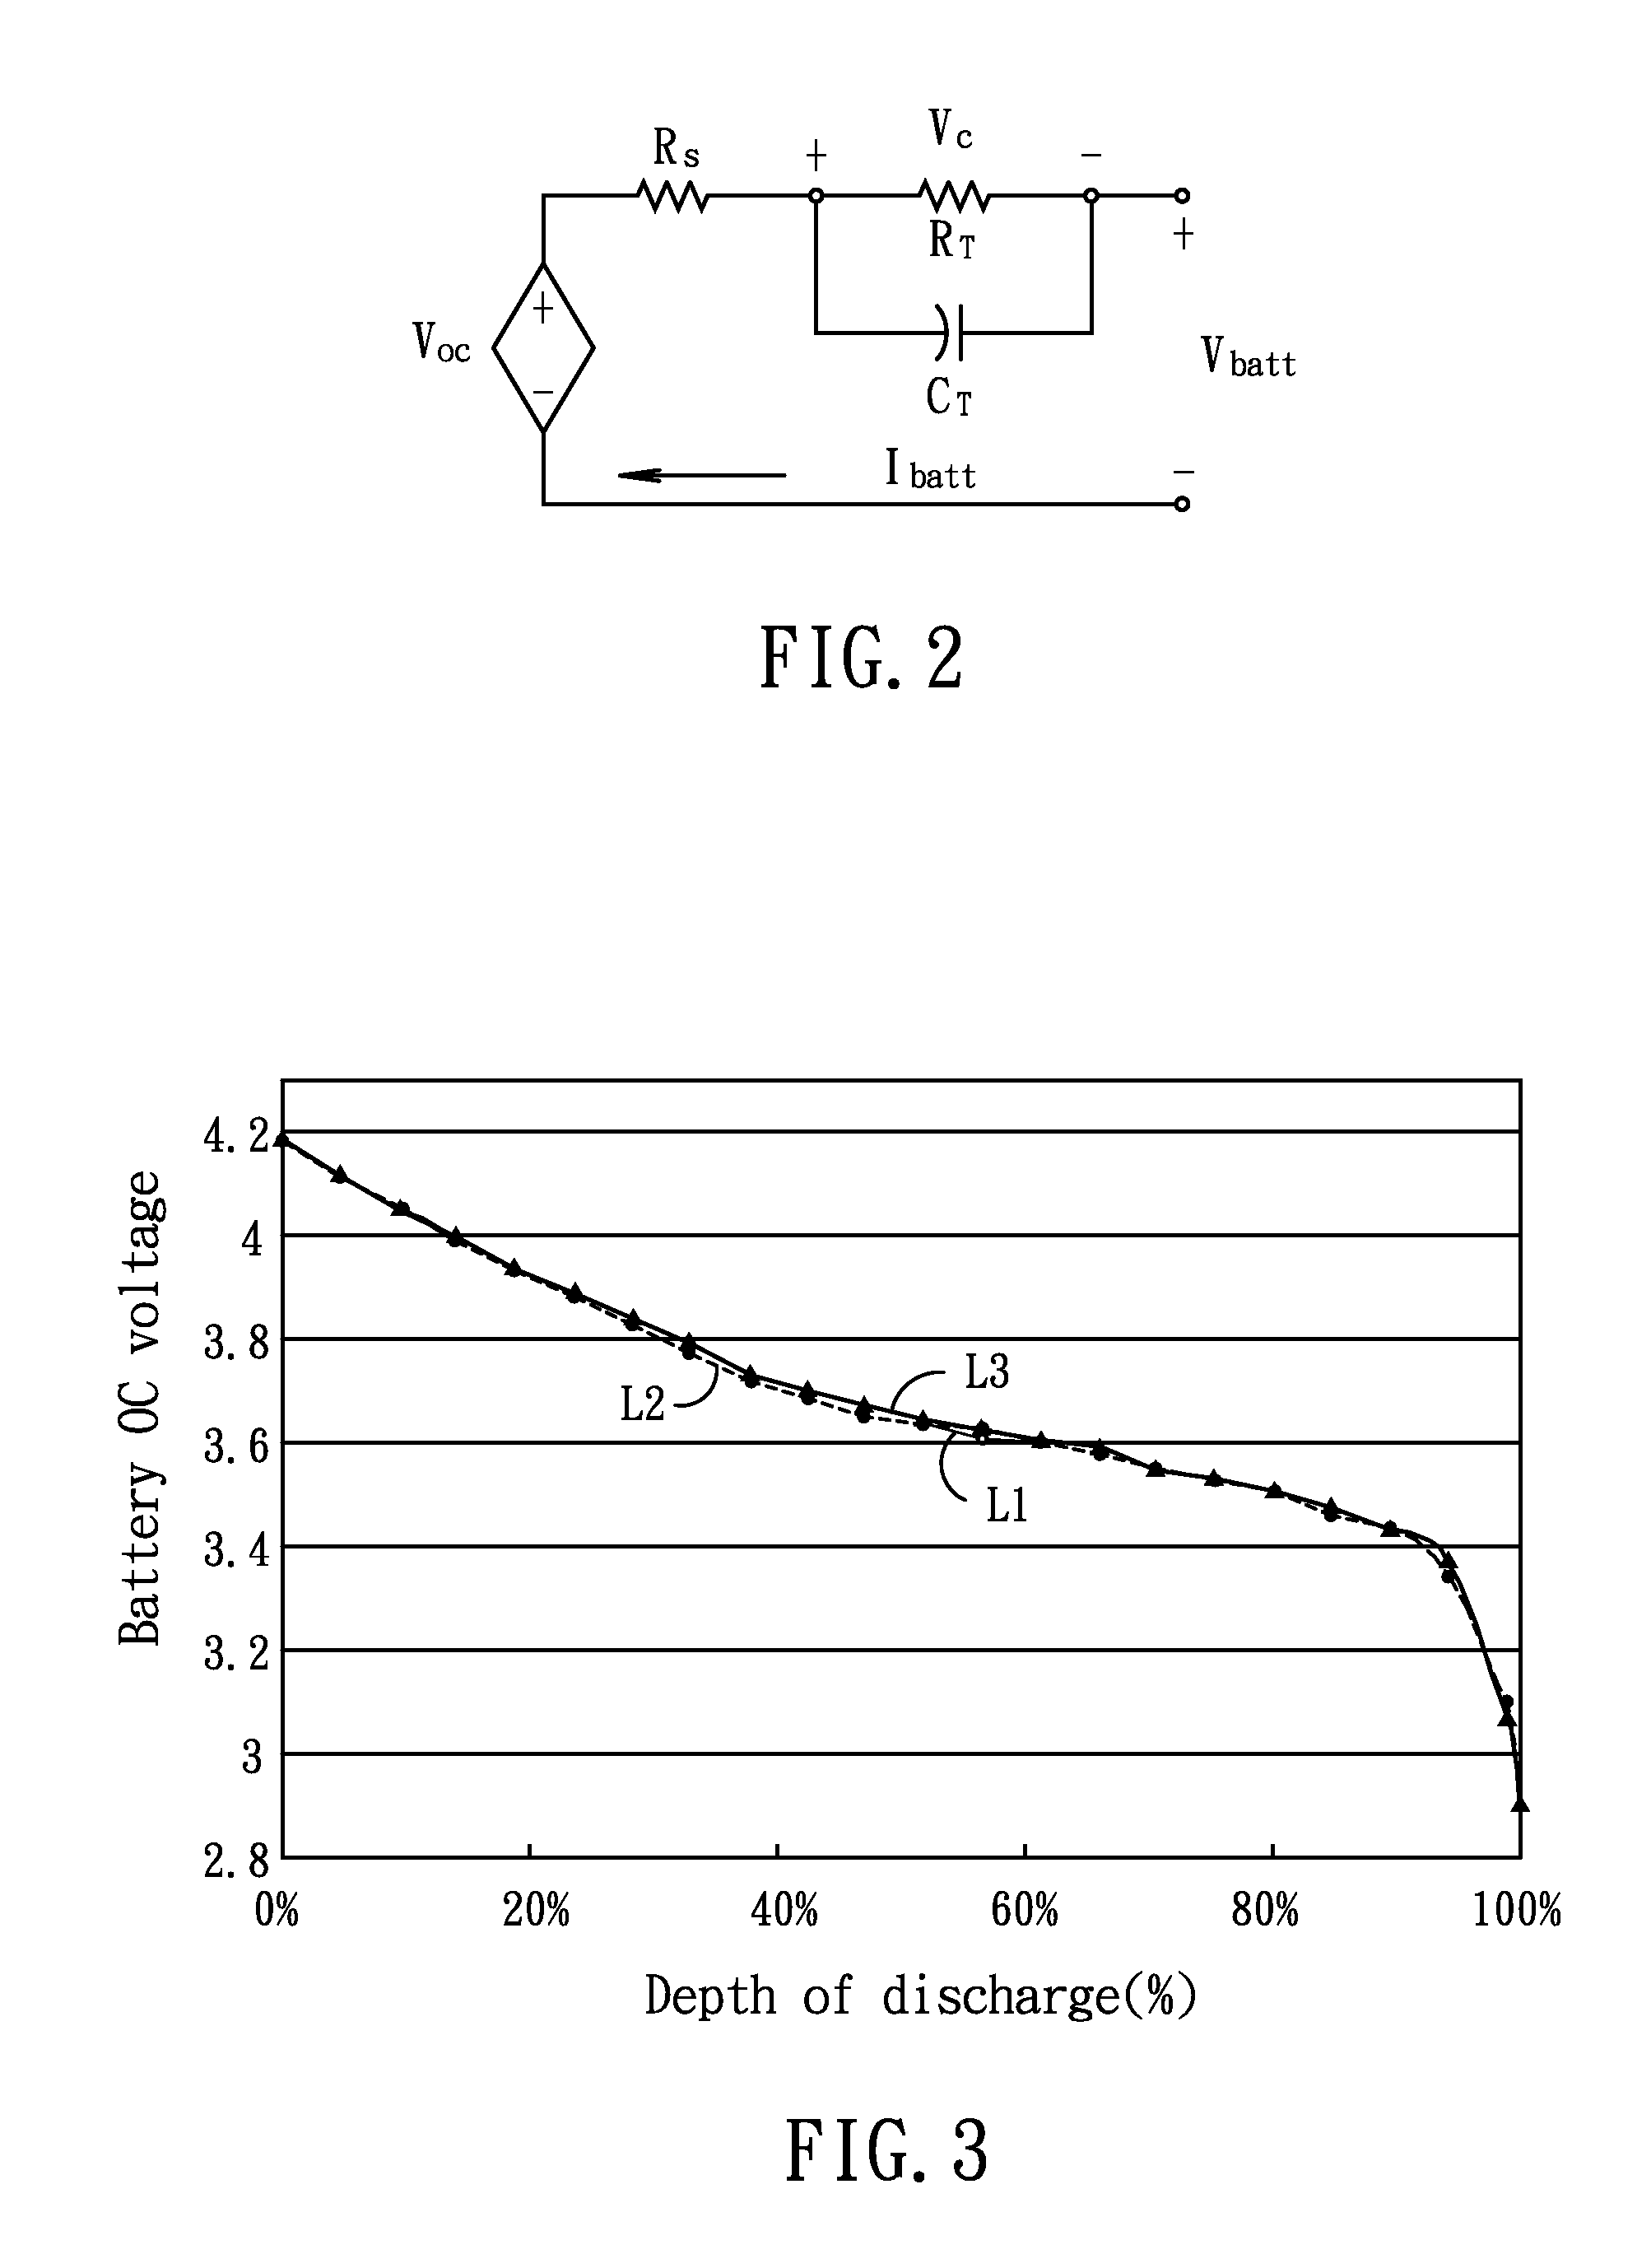 Apparatus for estimating battery state of health